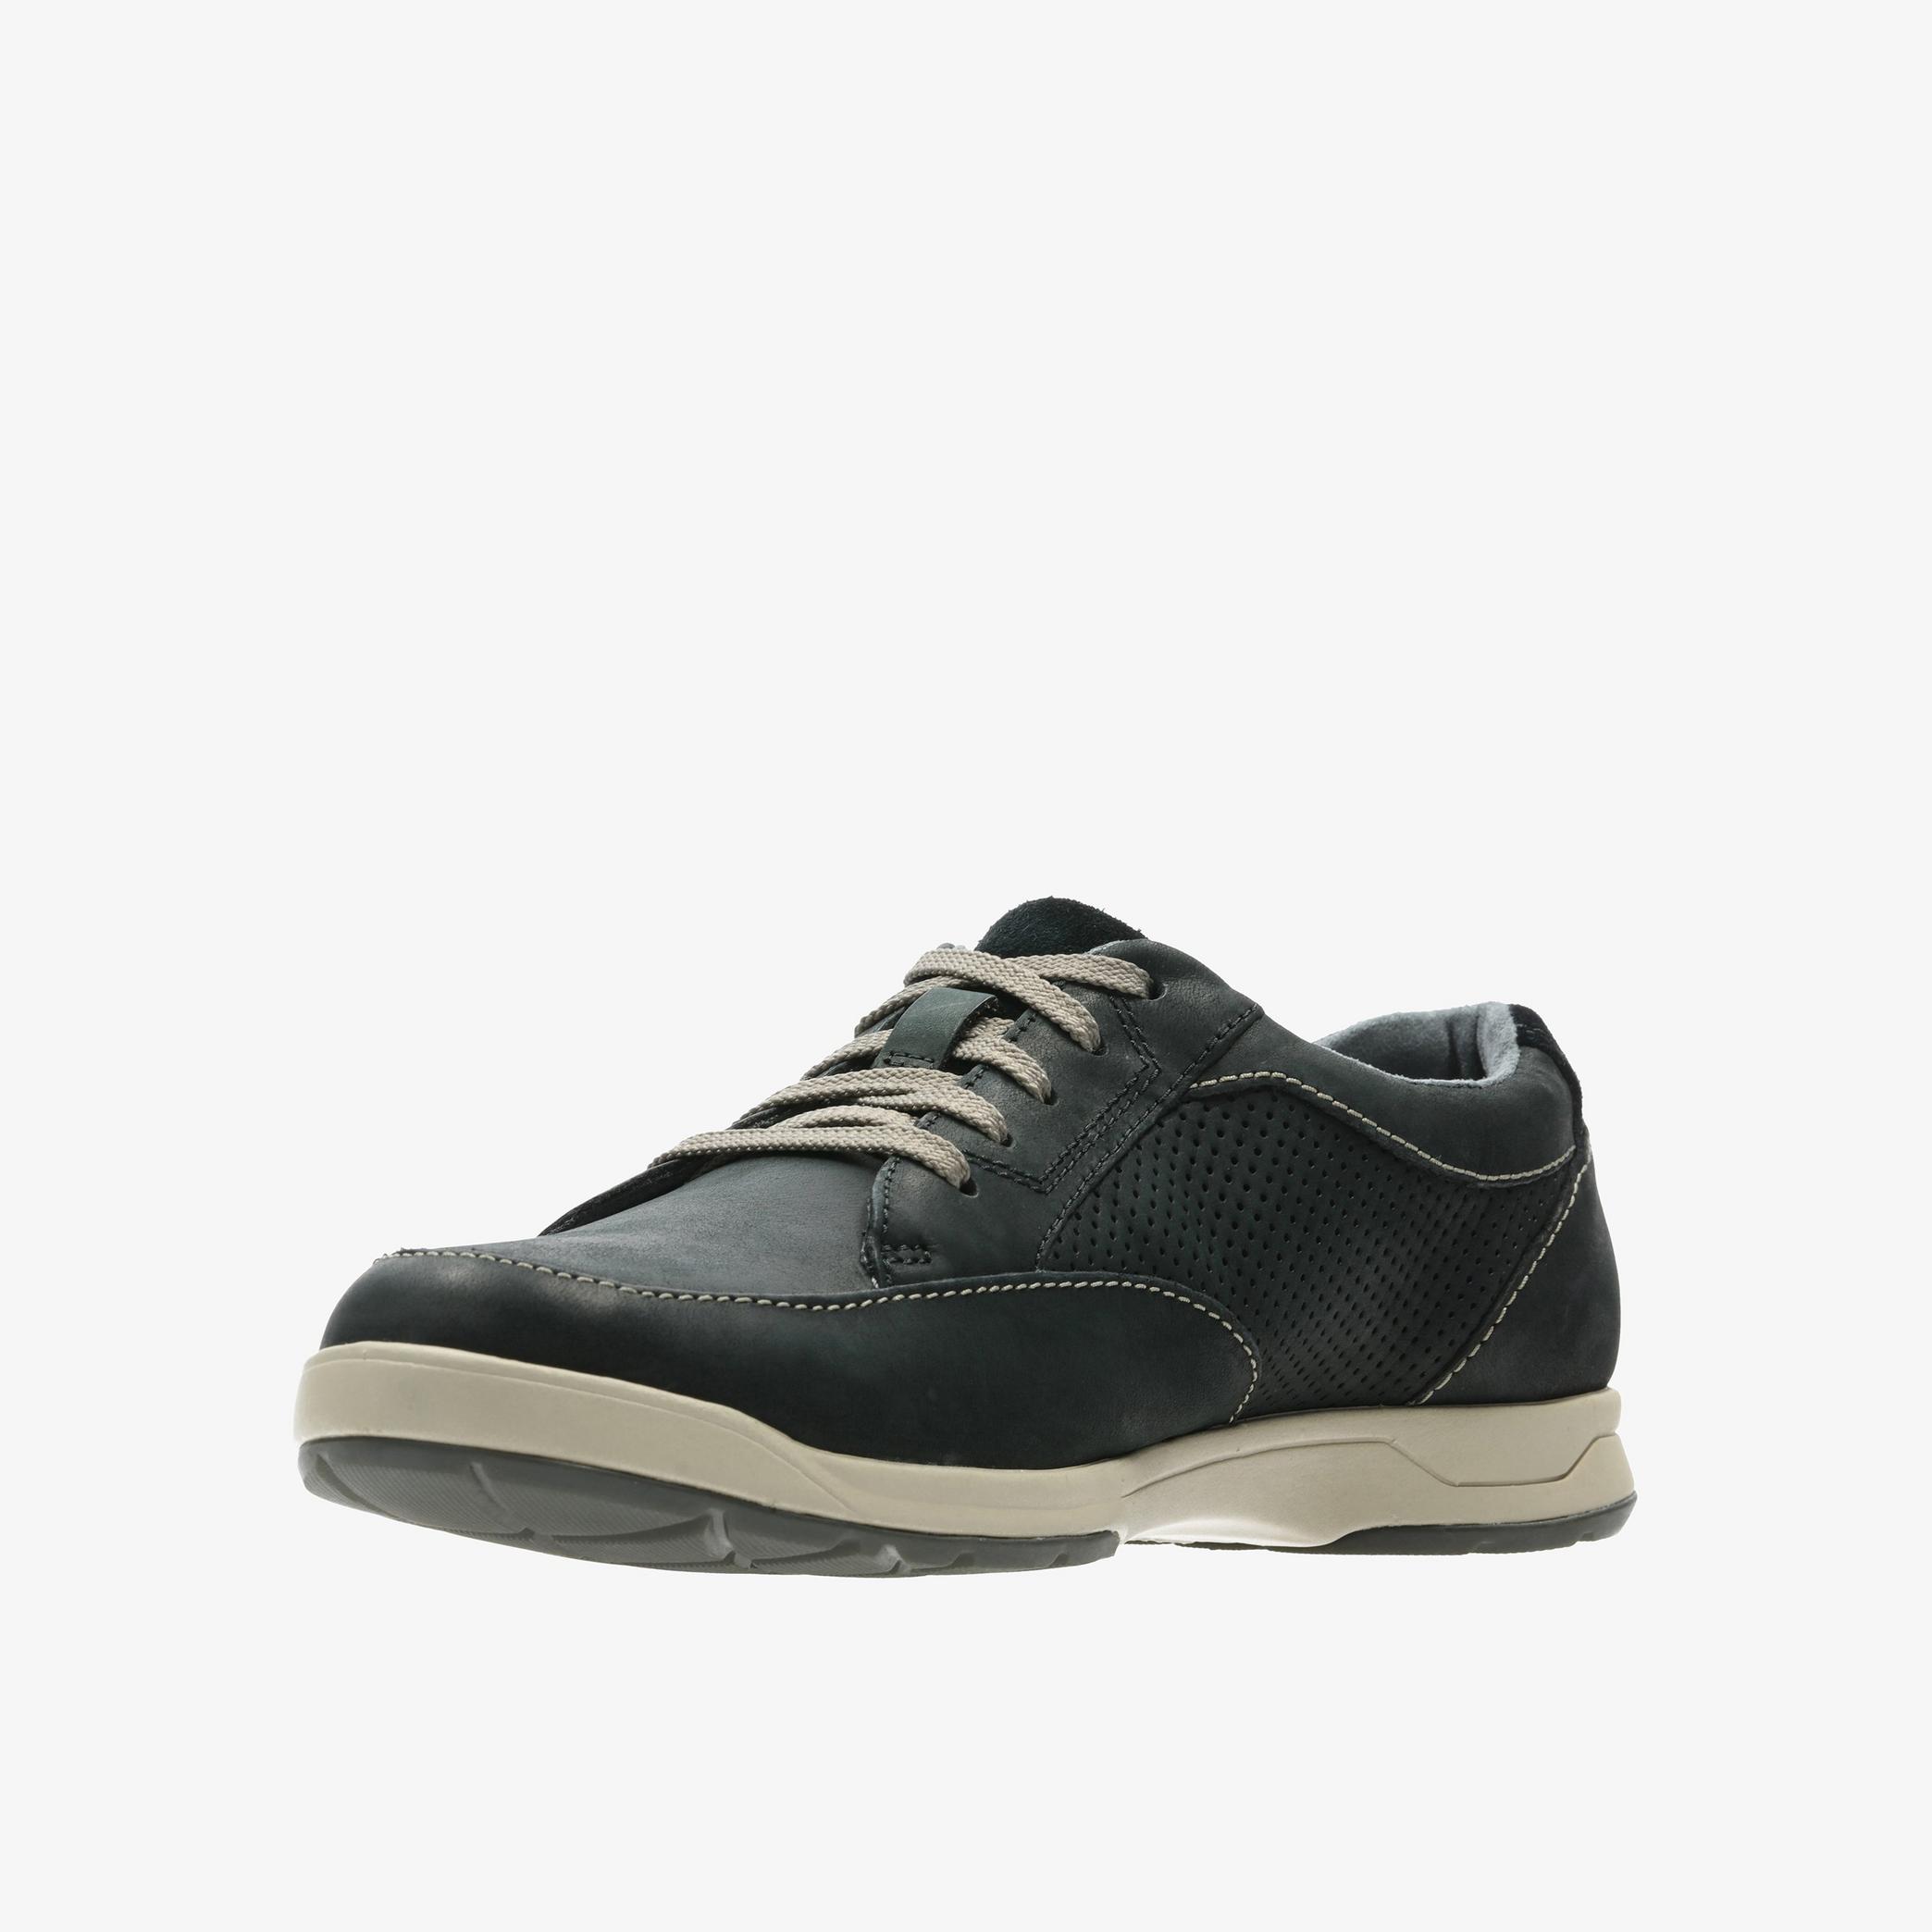 Stafford Park5 Black Nubuck Derby Shoes, view 4 of 6